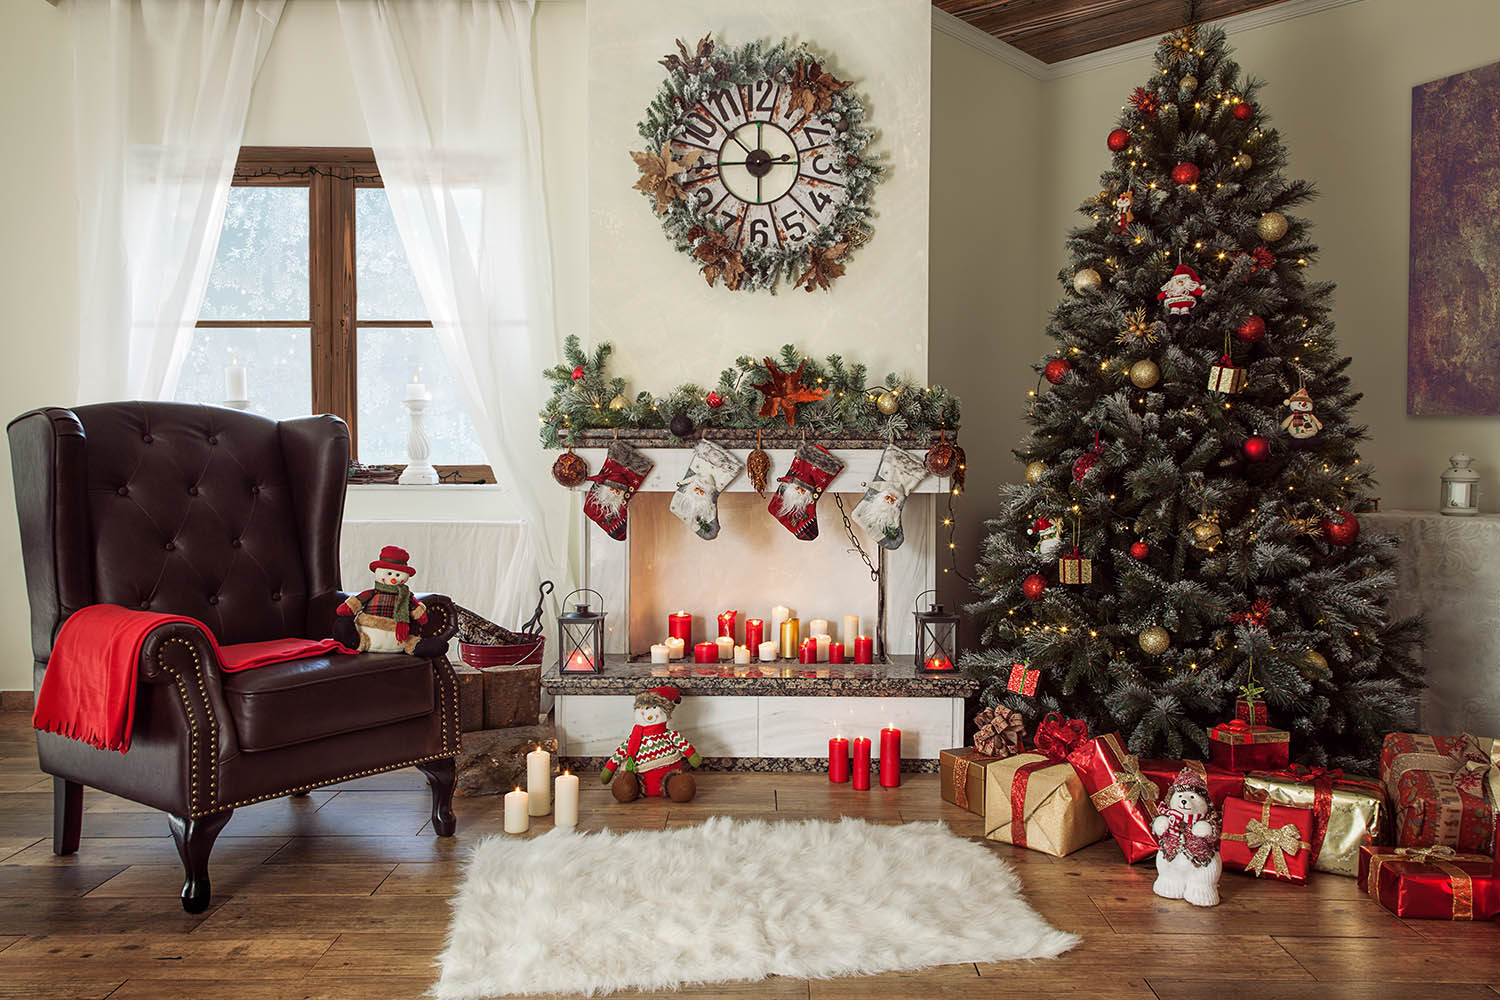 How to avoid the Christmas tree wheezes and sneezes | Better Homes and ...